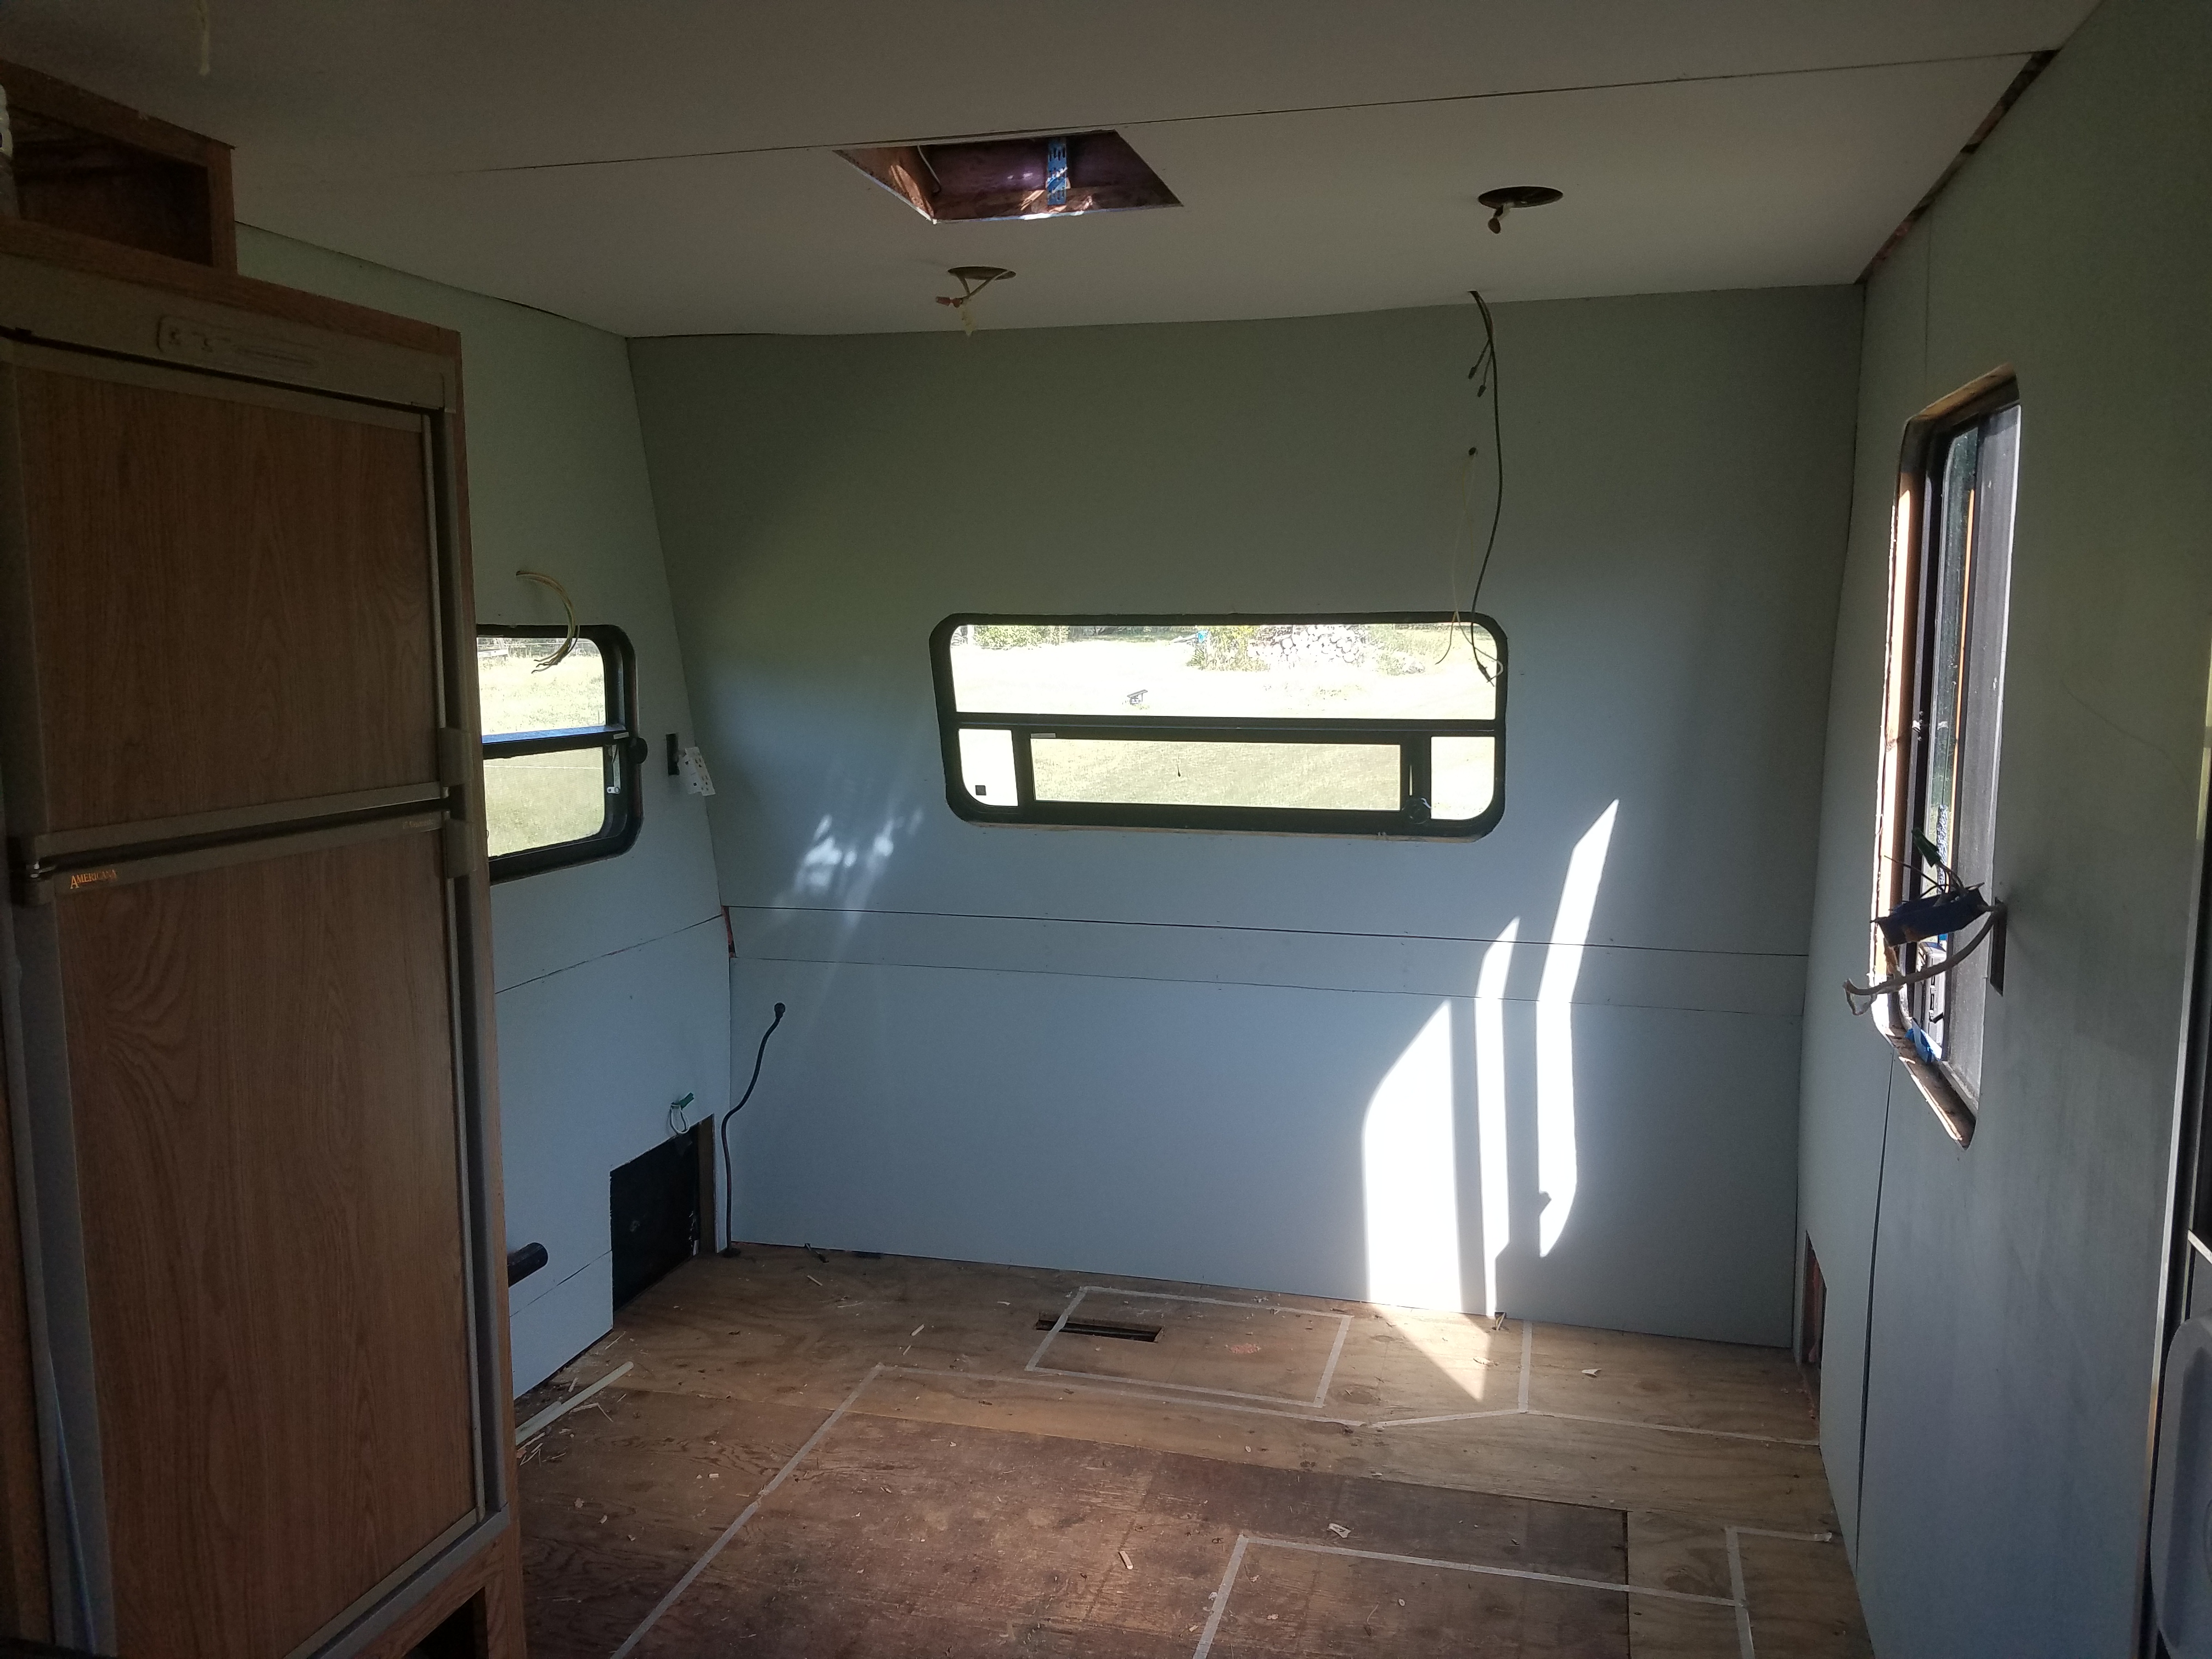 Fully paneled kitchen in the travel trailer